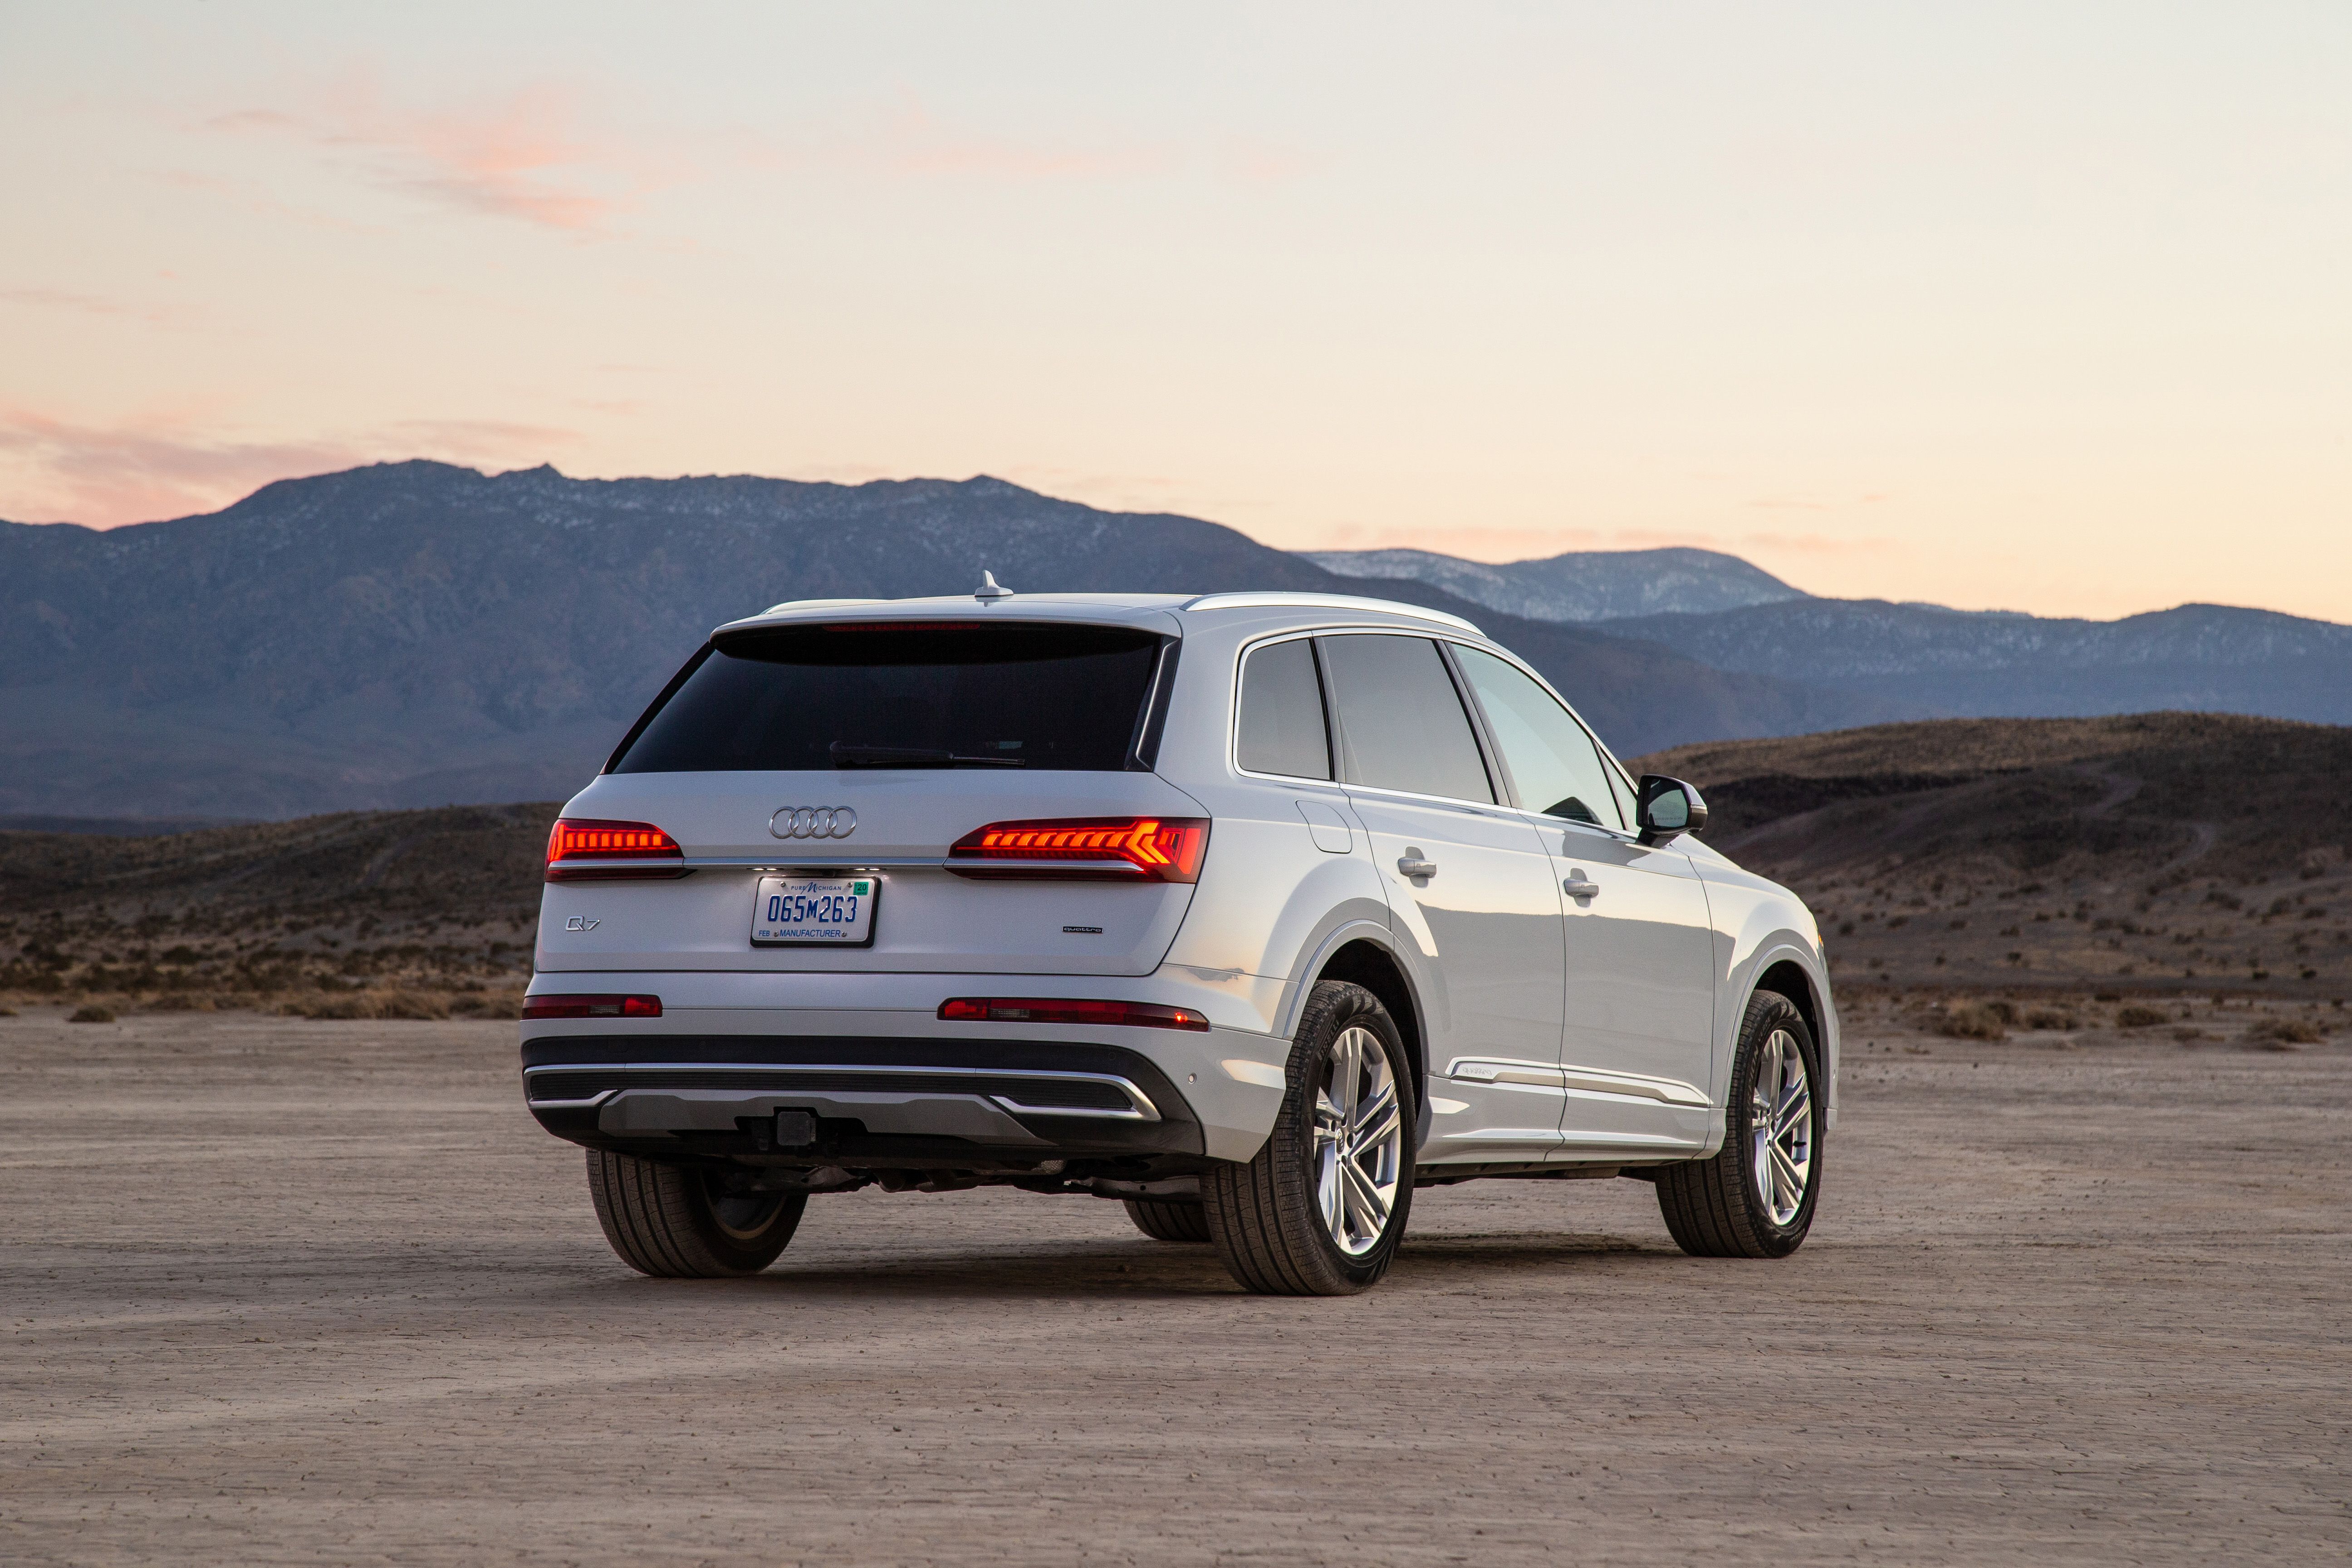 2022 Audi Q7 Review, Pricing, and Specs